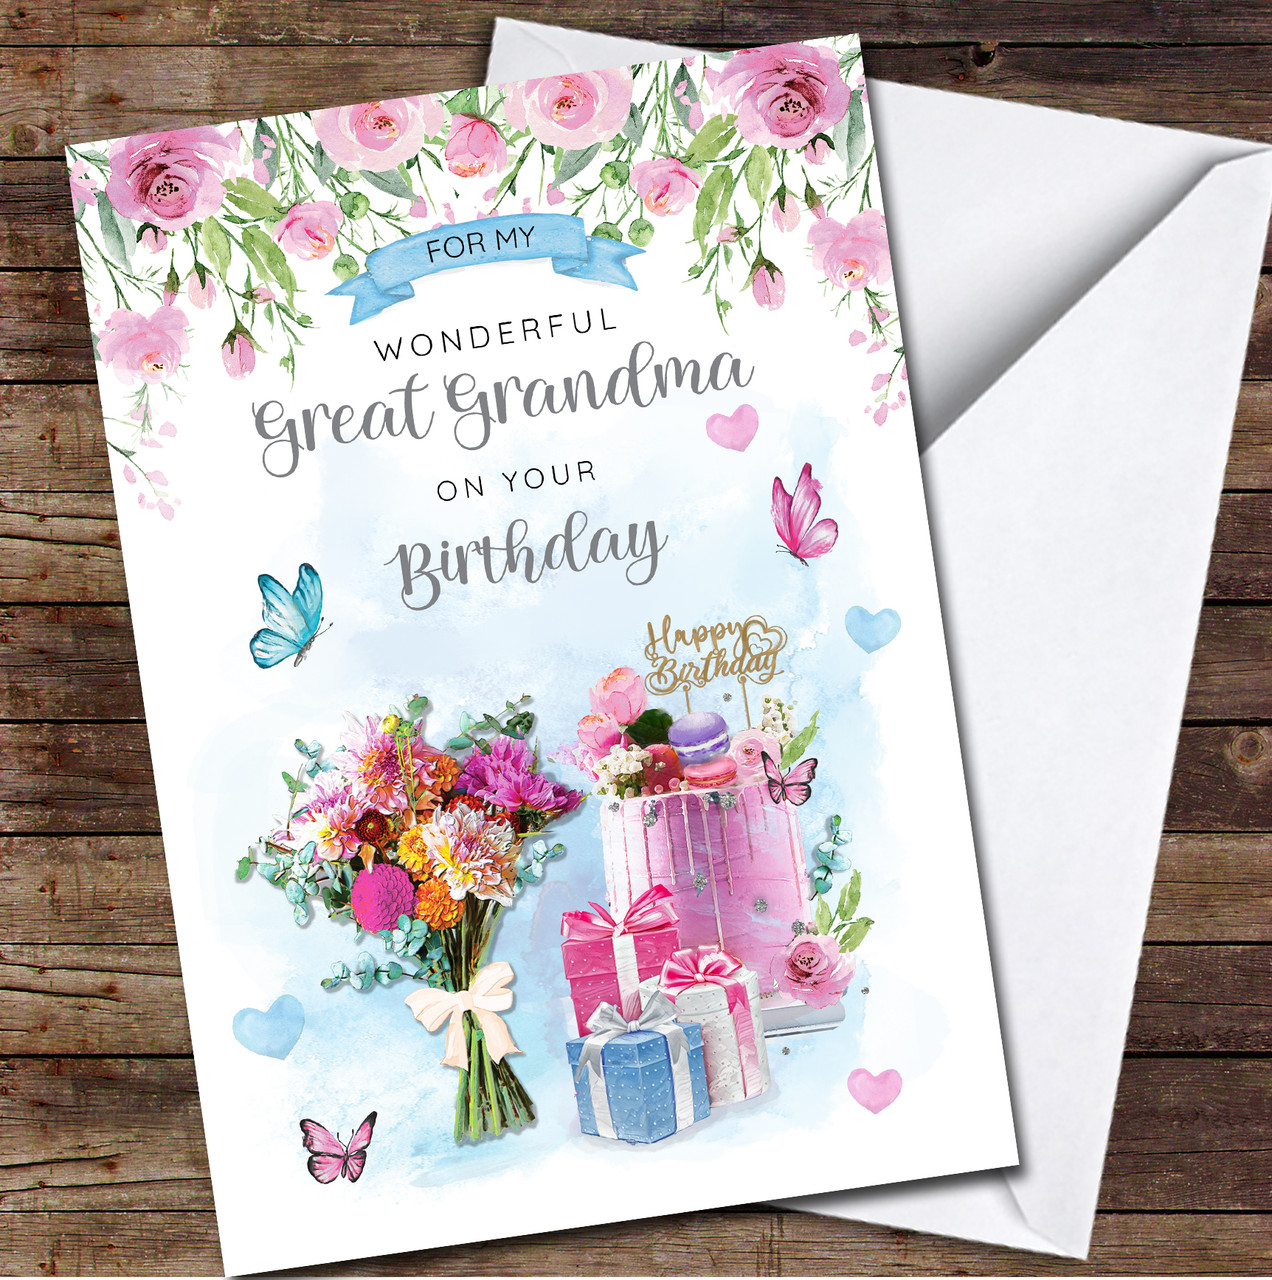 Happy Anniversary Card, Personalized Anniversary Card, Floral